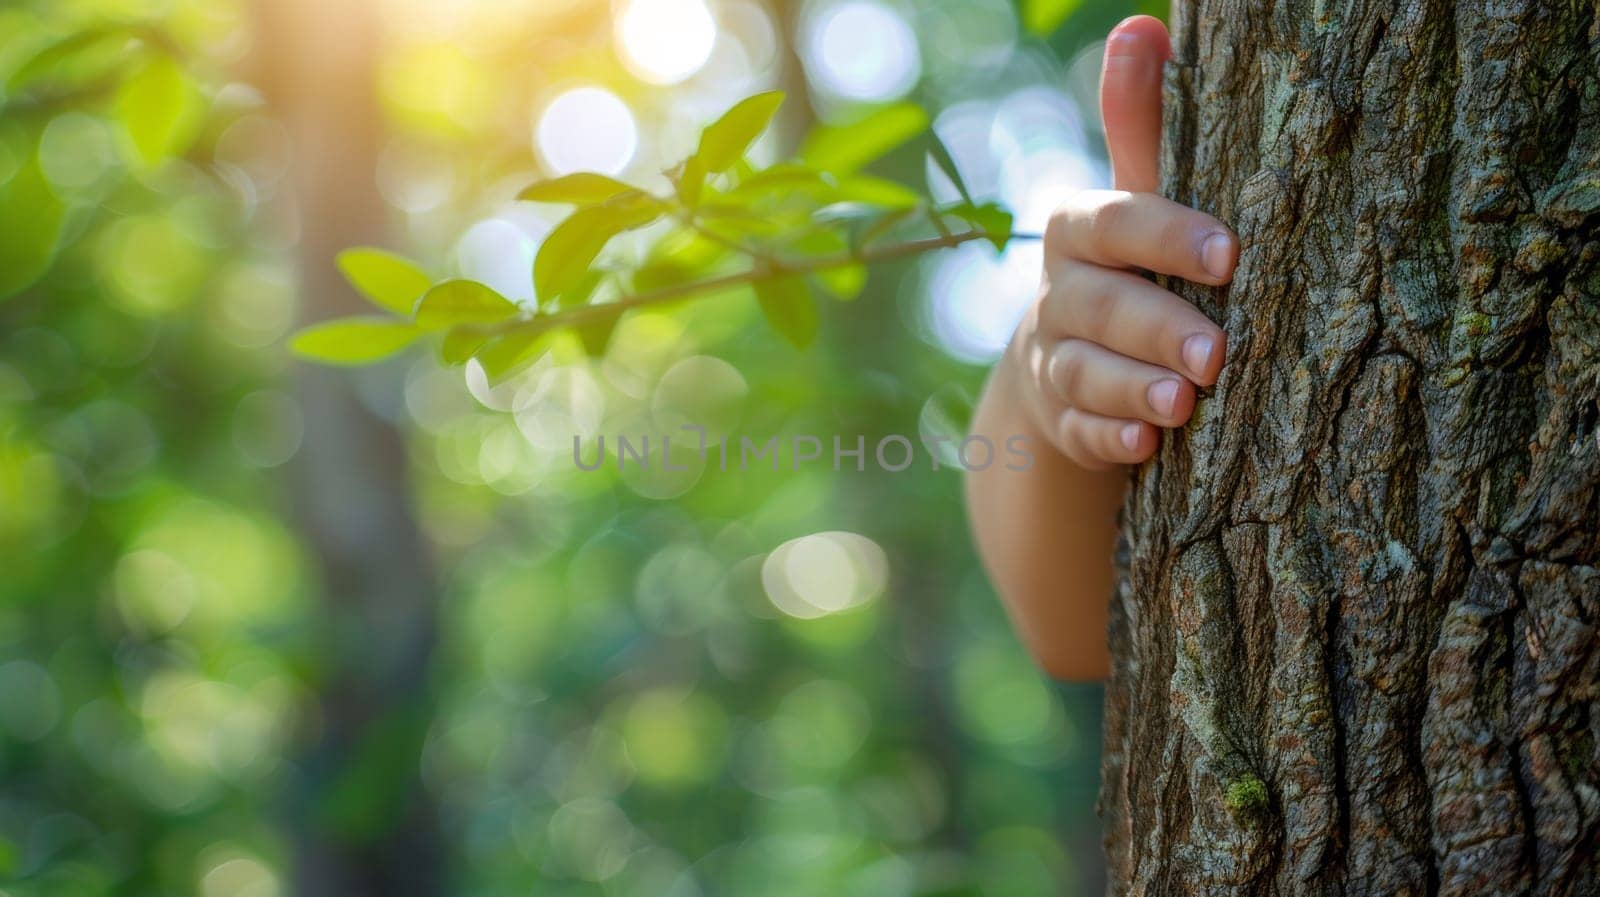 A person's hand on a tree trunk with green leaves, AI by starush